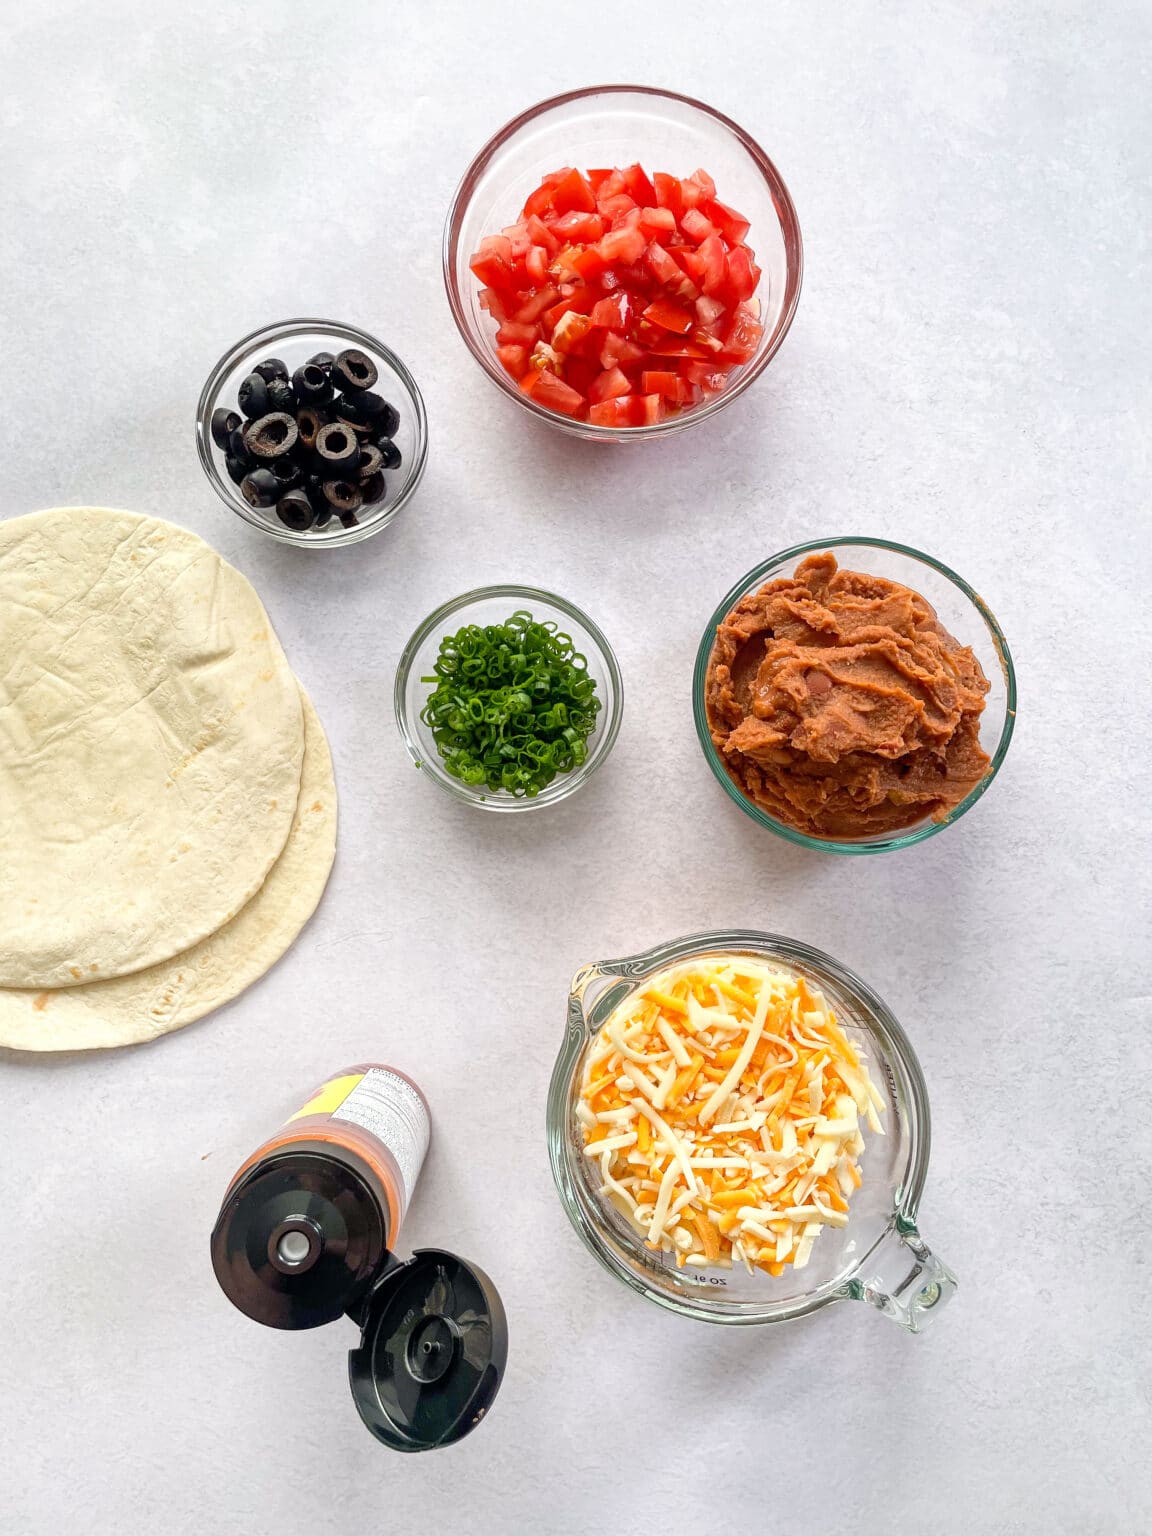 How to Make Homemade Copy Cat Taco Bell Mexican Pizza